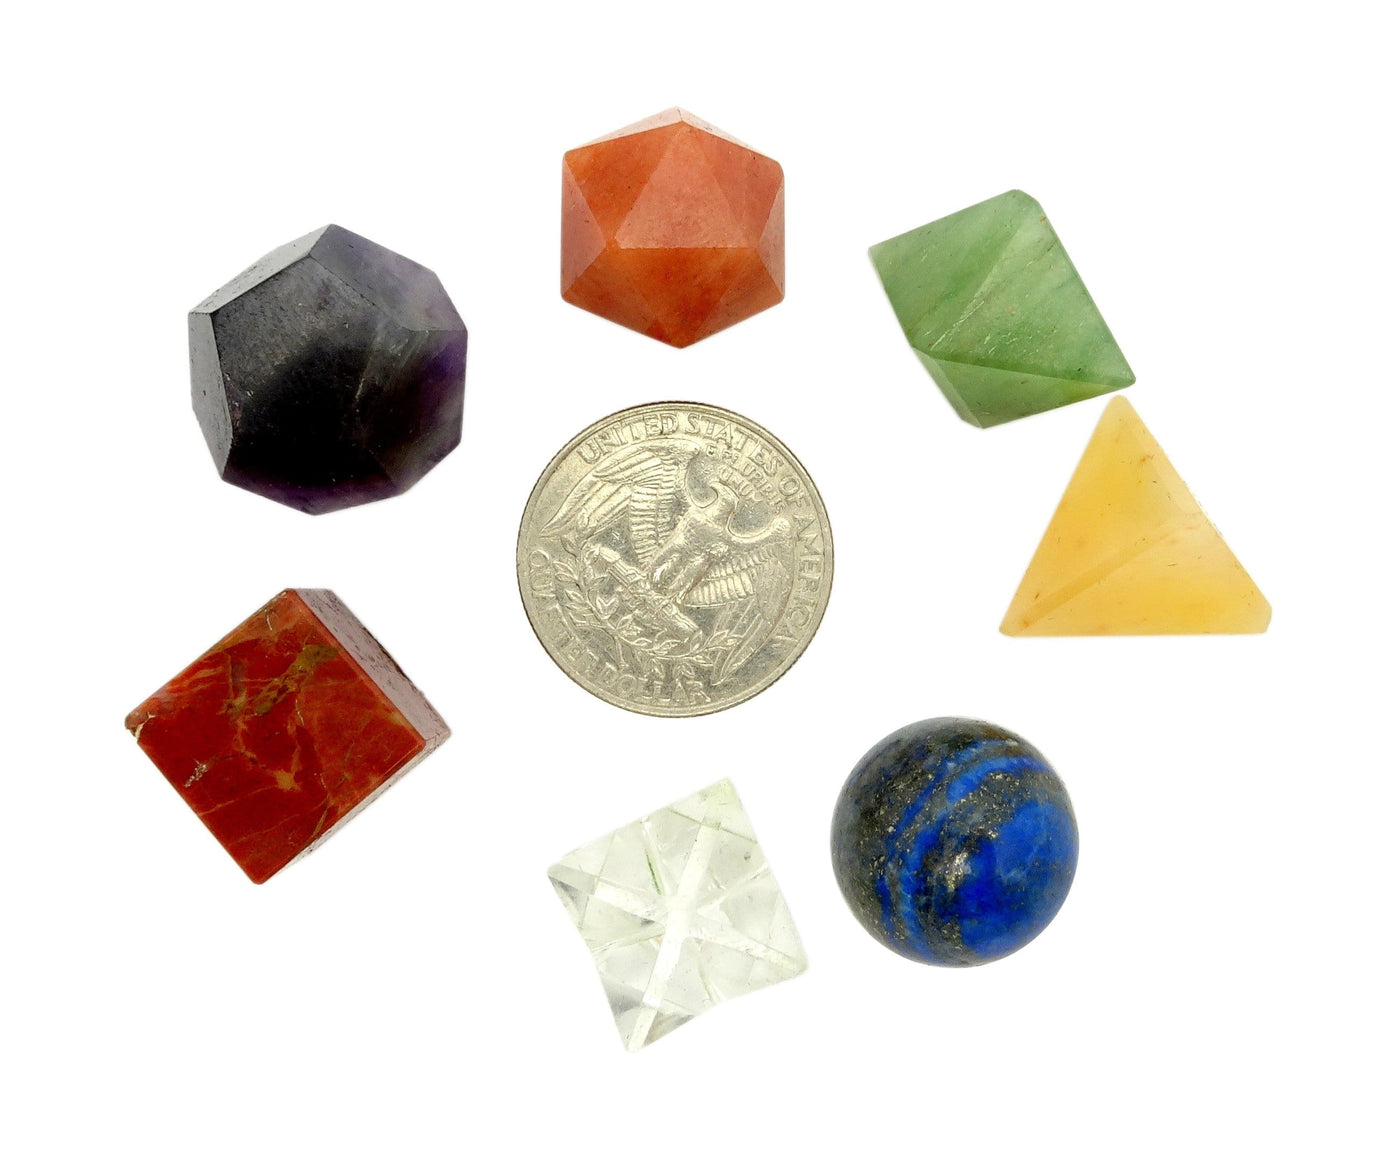 Seven chakra sacred stone geometry on a white background.  Pictured with a quarter to show stones are about quarter size.